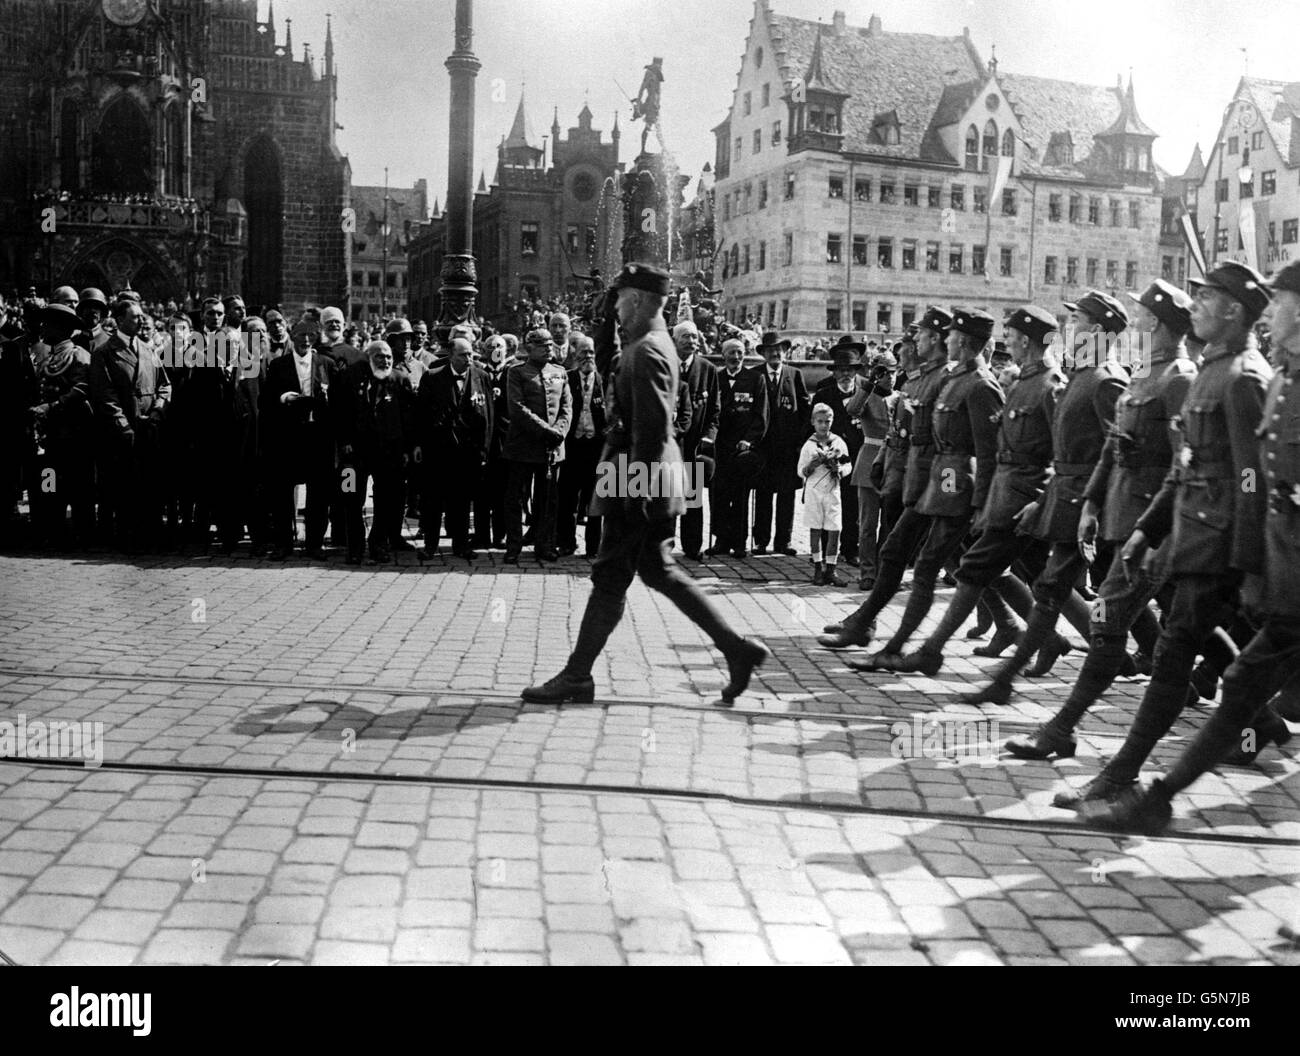 1923: Stosstruppen marching past their leader, Herr Adolf Hitler (2nd left, trenchcoat), politicians and Bavarian members of the former German Imperial Army on 'Great German Day' in Nuremberg, Bavaria. Around 100,000 people are estimated to have attended the event. Stock Photo